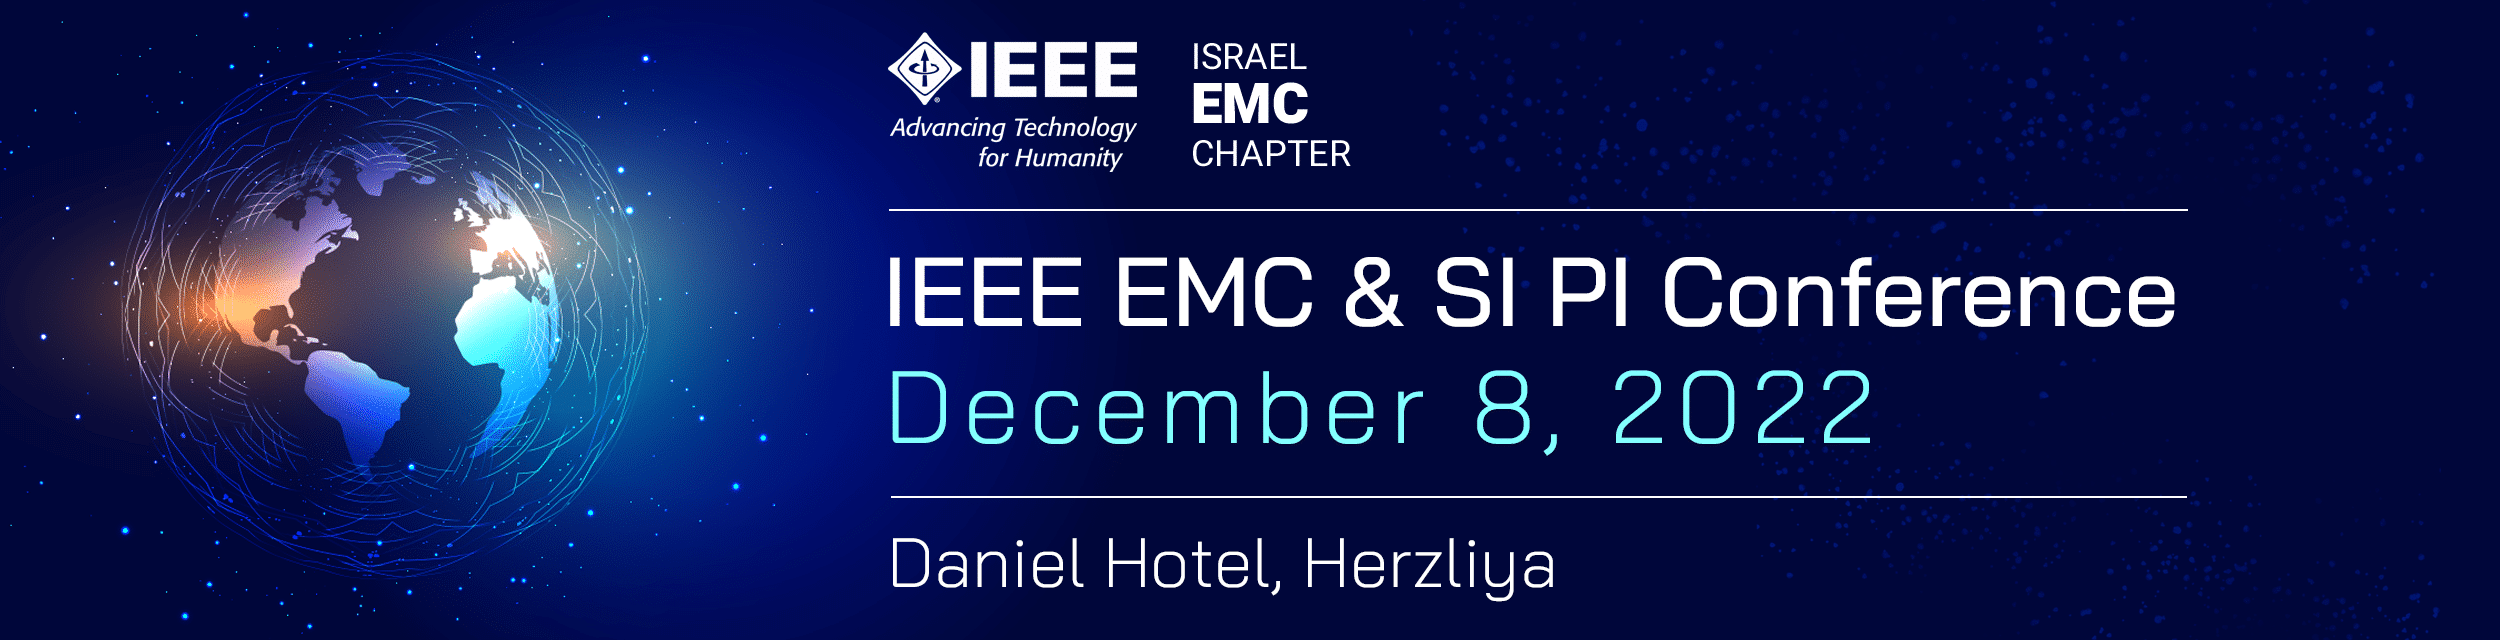 IEEE EMC Si Pi Conference